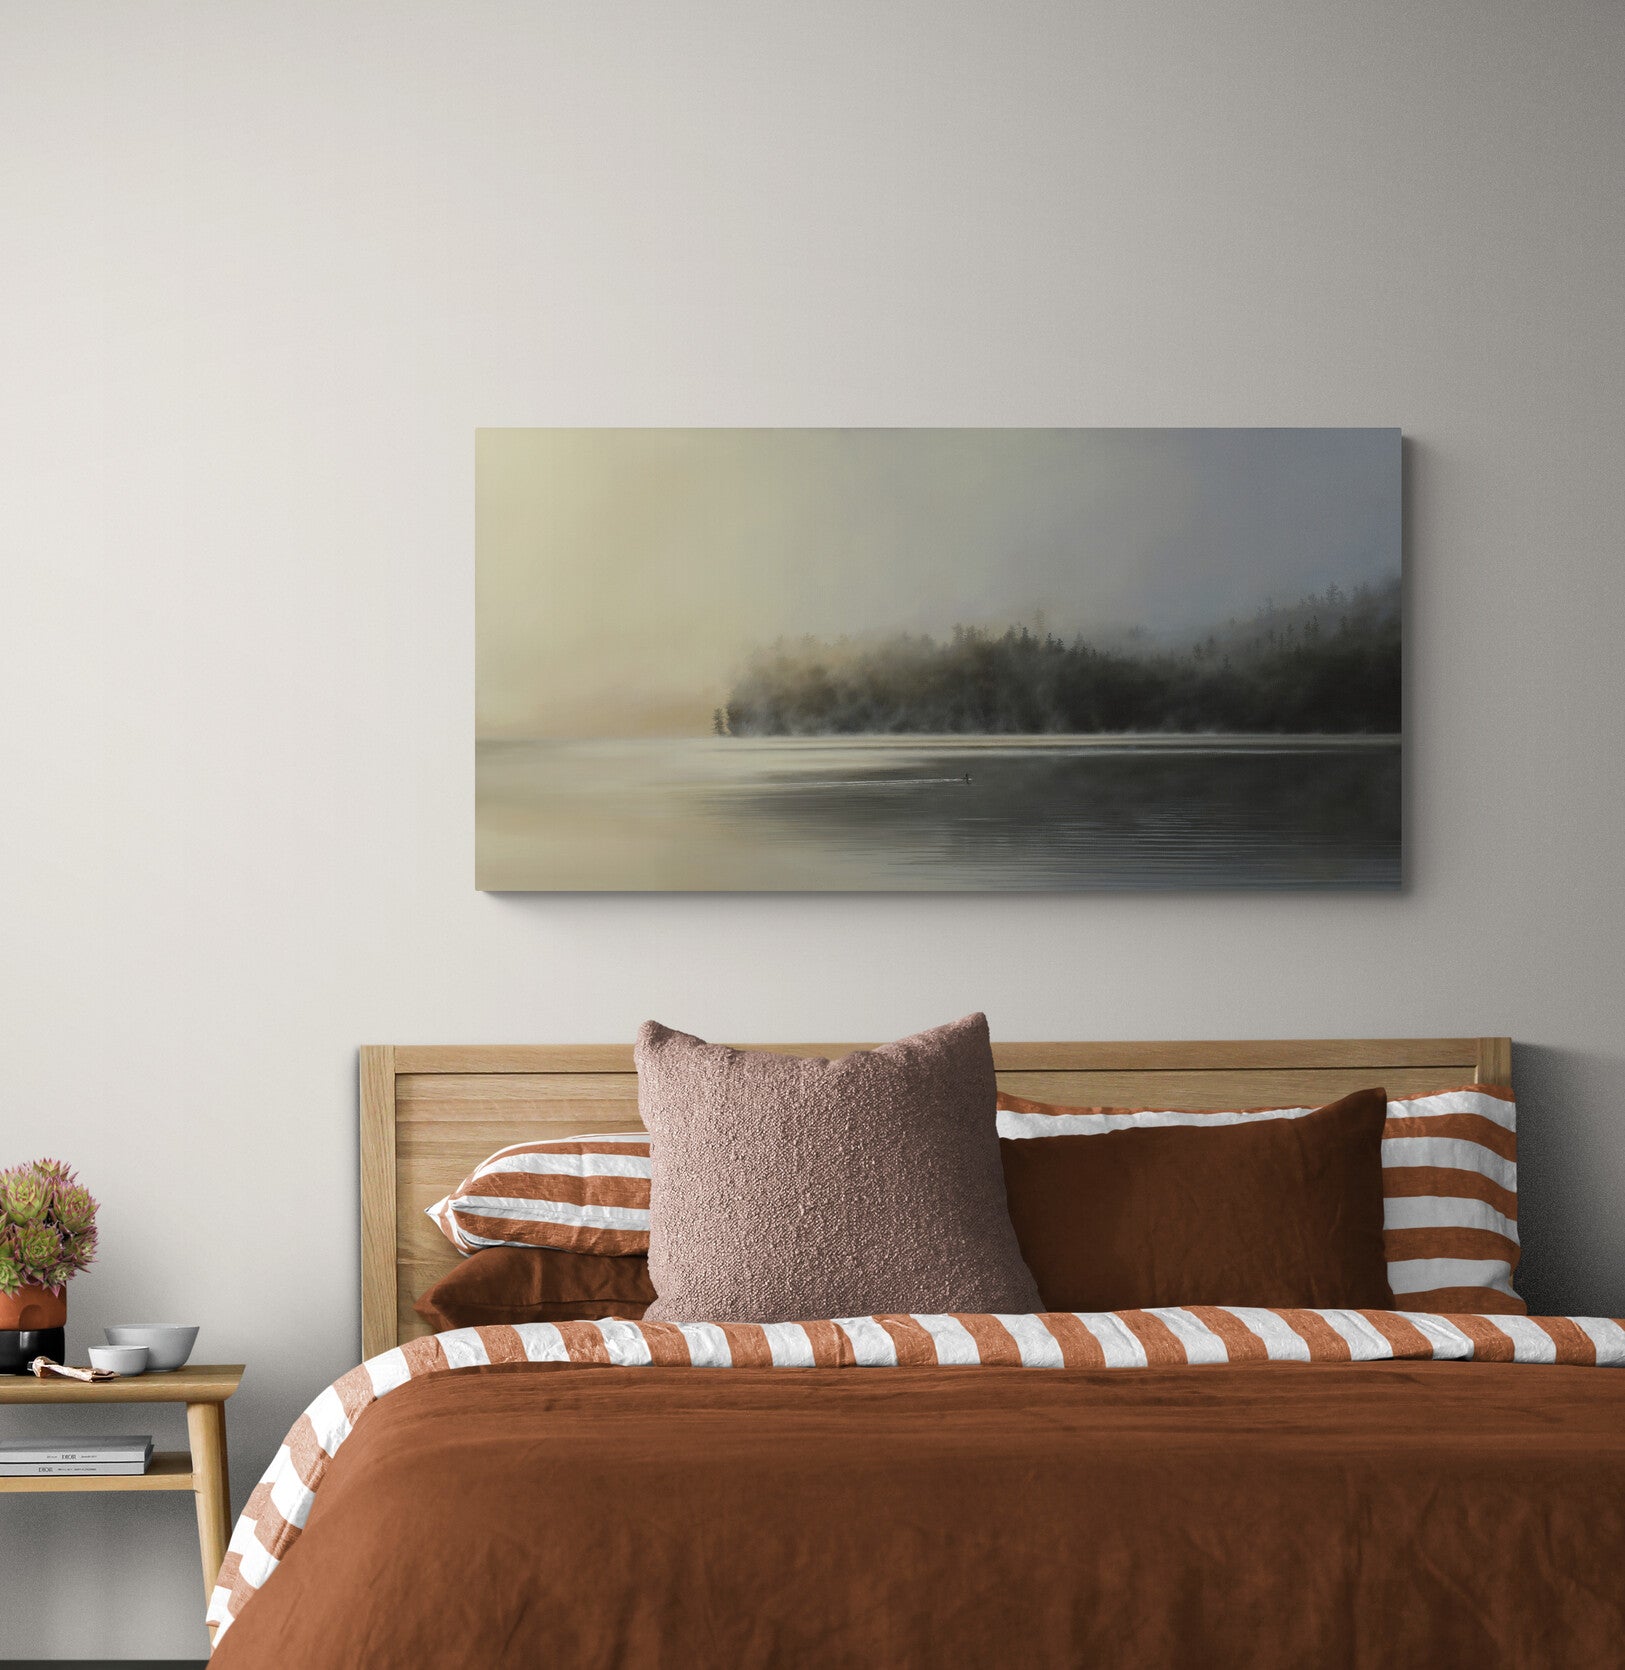 The original painting “Dayspring" by Hannah Kilby from Hannah Michelle Studios, displayed as a fine art print.